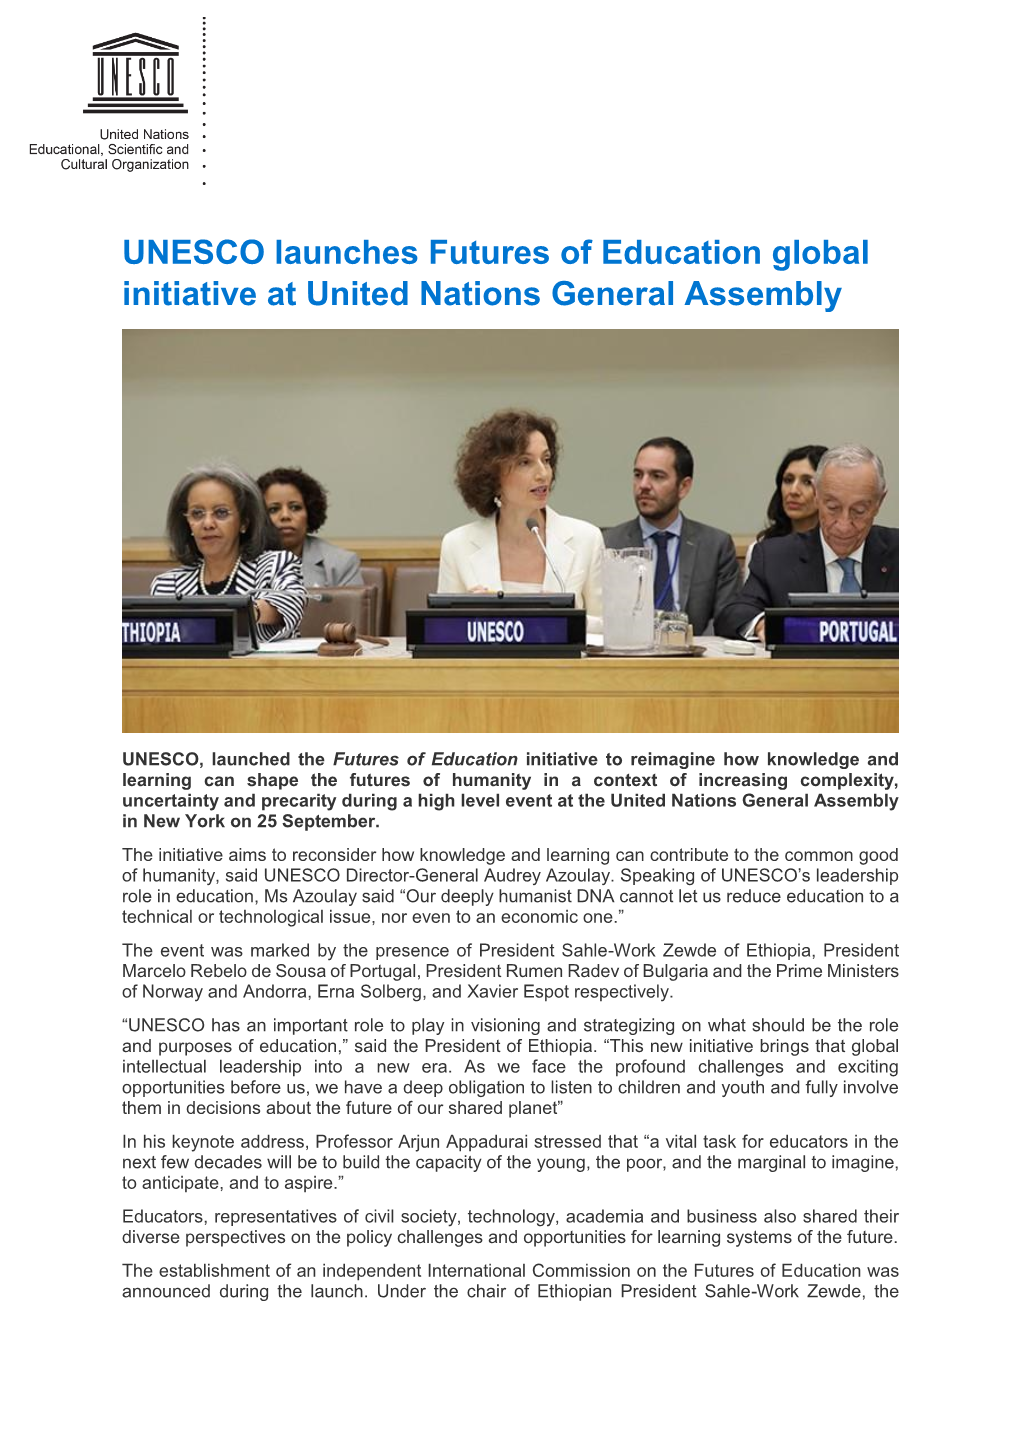 UNESCO Launches Futures of Education Global Initiative at United Nations General Assembly